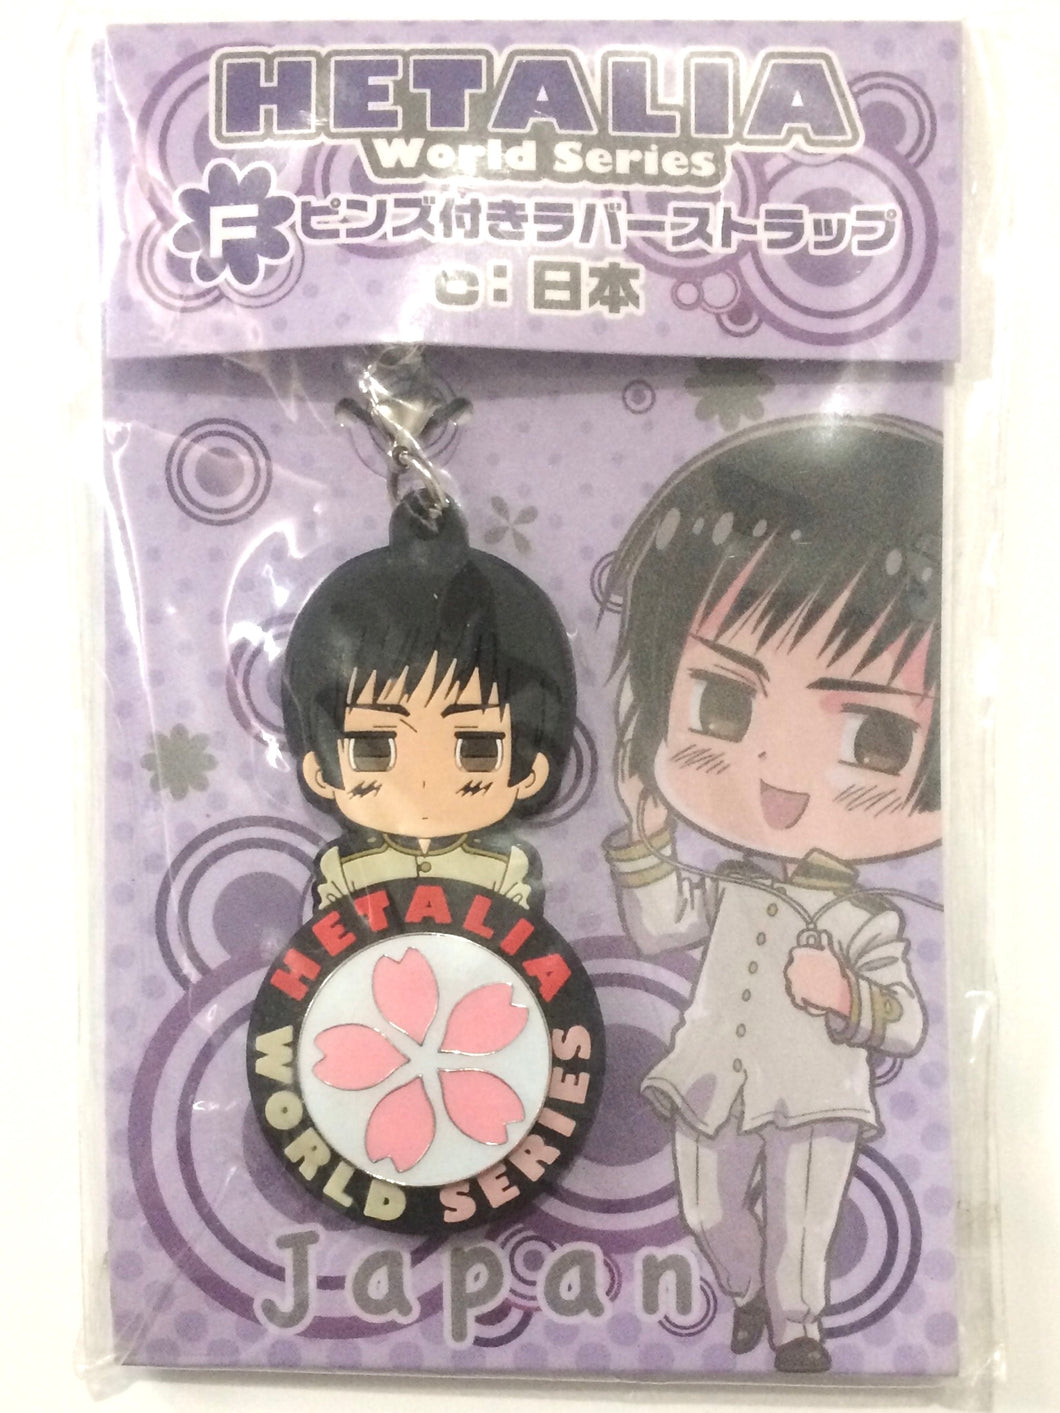 Hetalia World Series - Japan - Rubber Strap with Pin